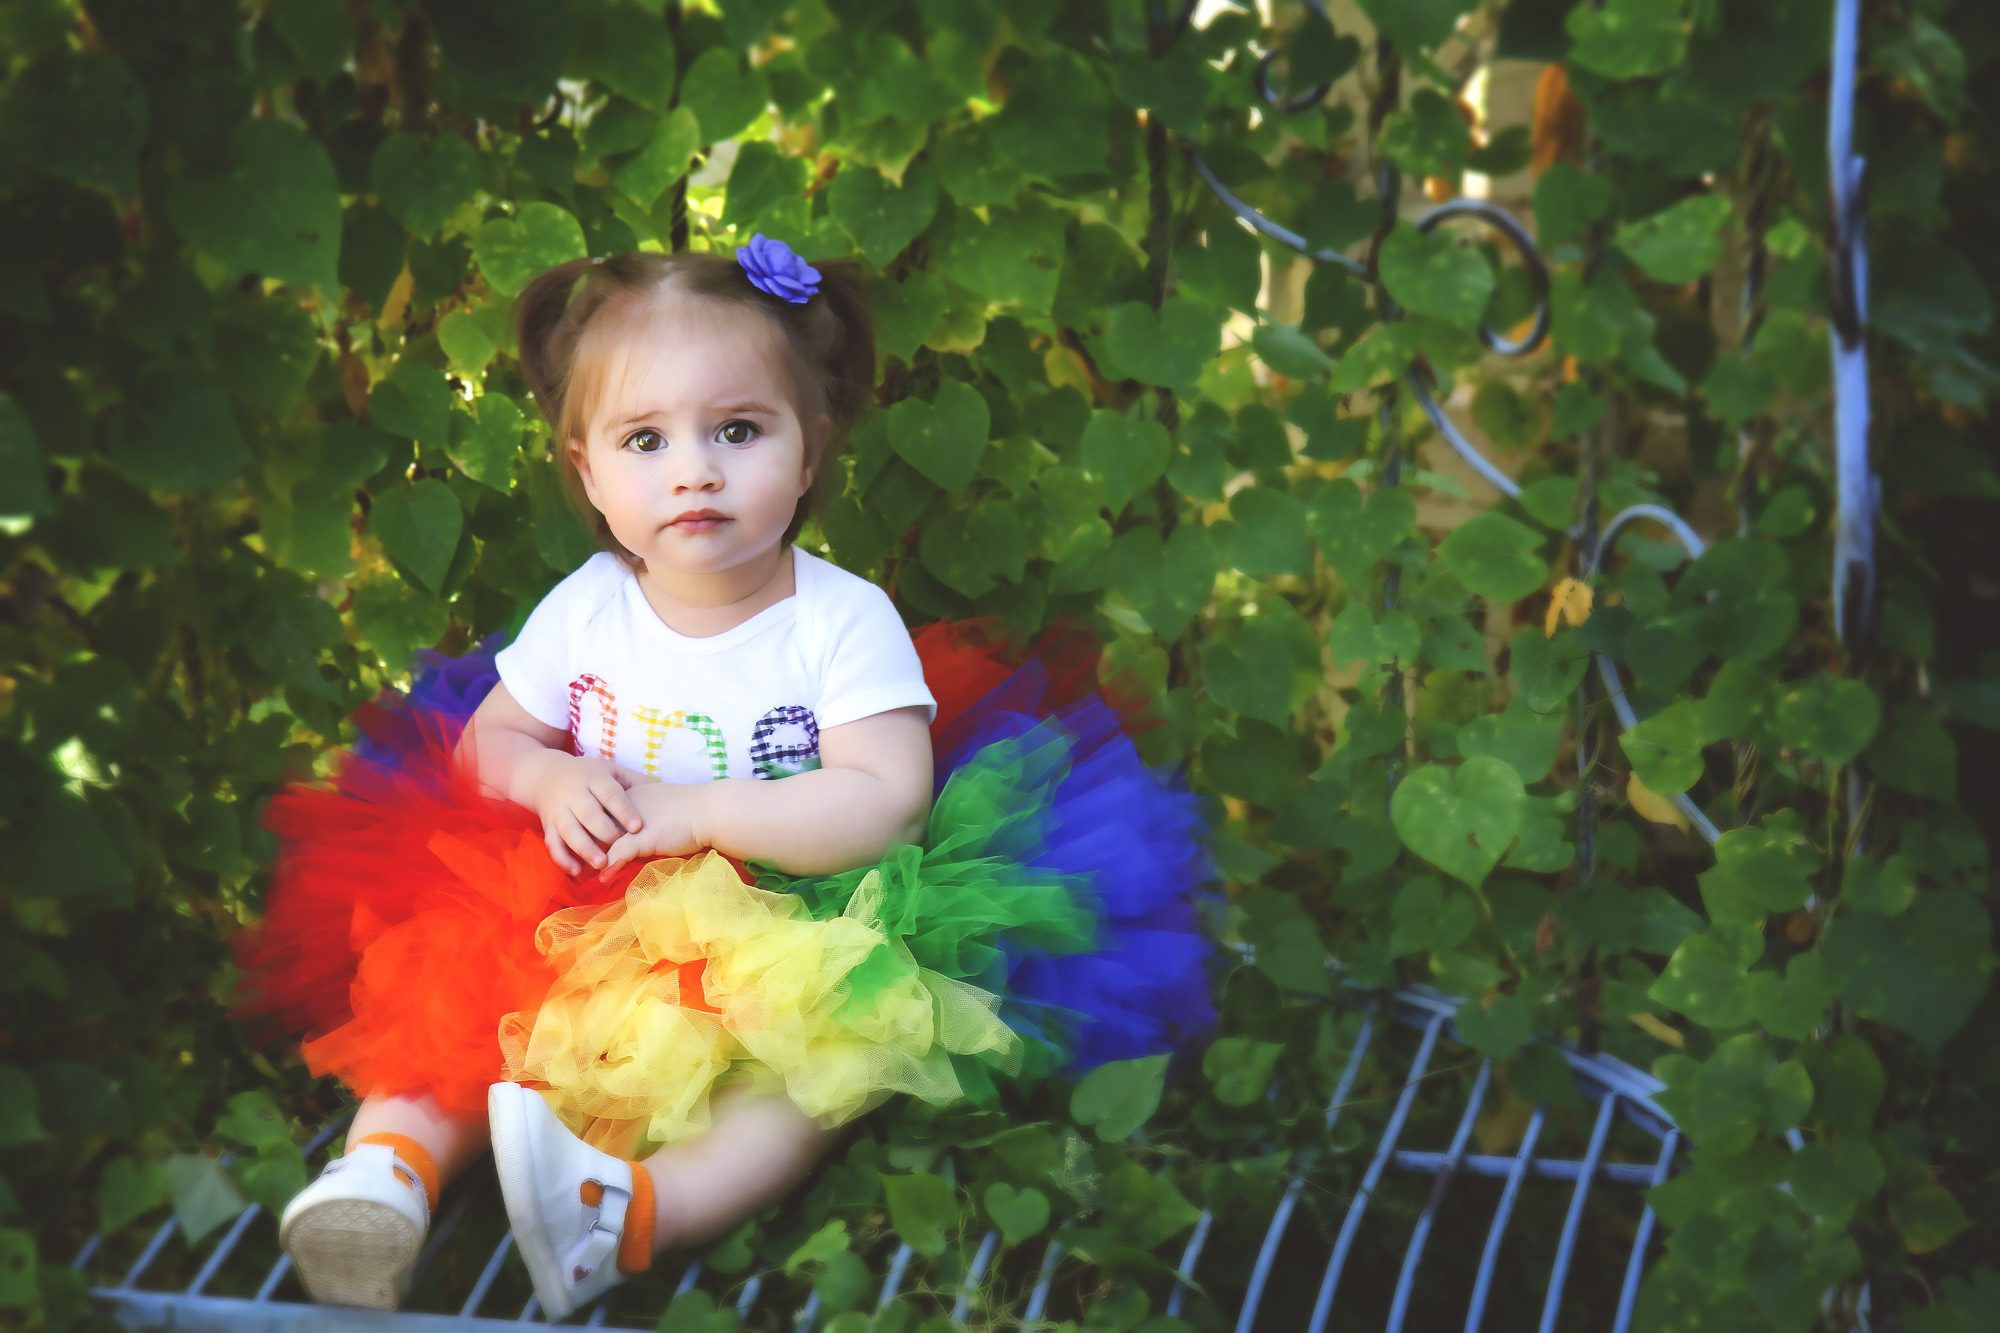 One year old child wears a rainbow tutu and sits near morning glories